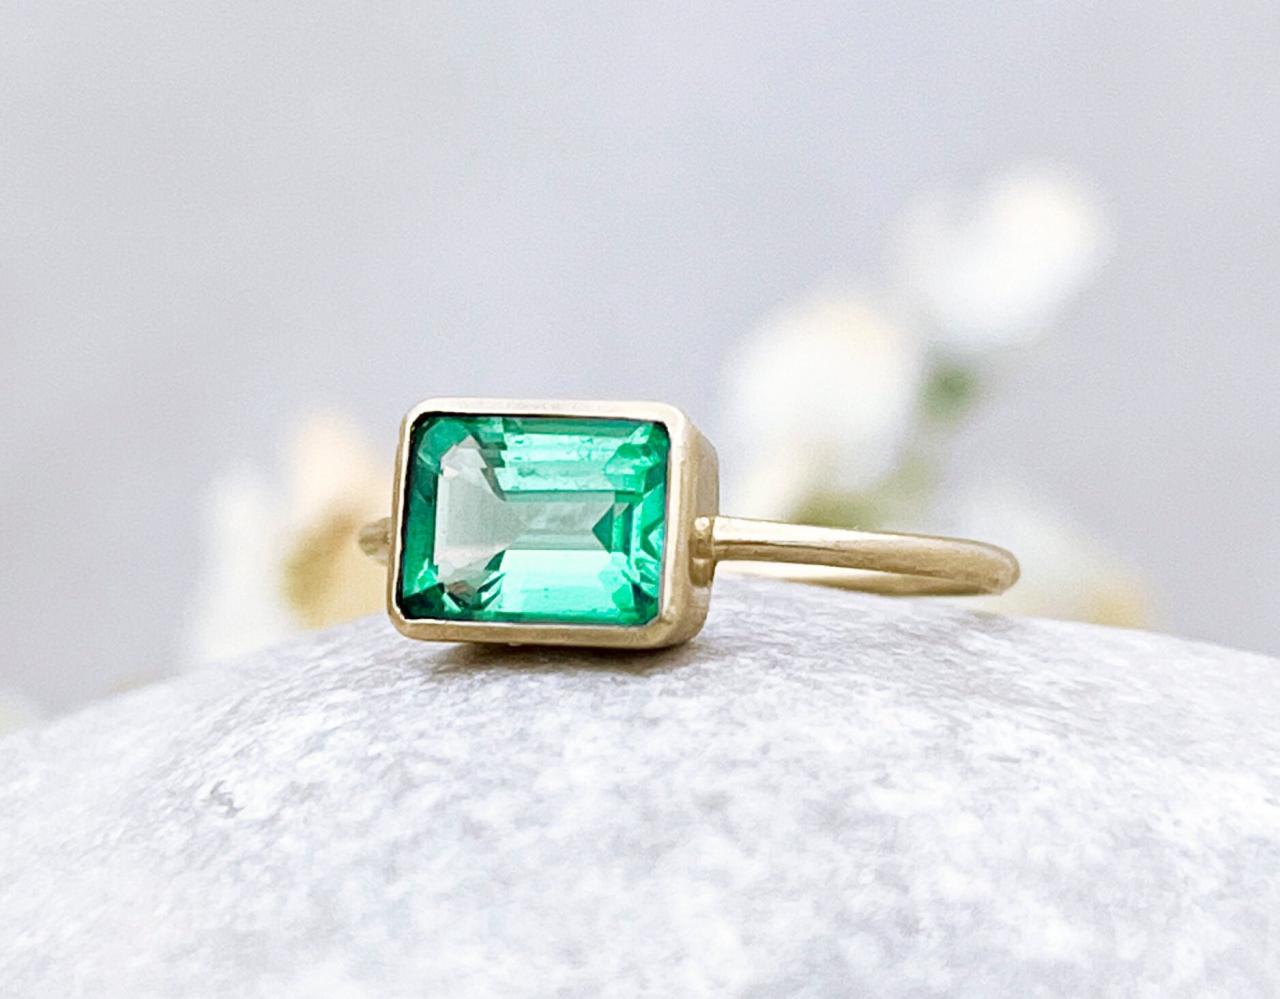 Engagement solid gold ring with green quartz, Emerald cut solitaire statement ring, 9k/18k dainty bezel set ring